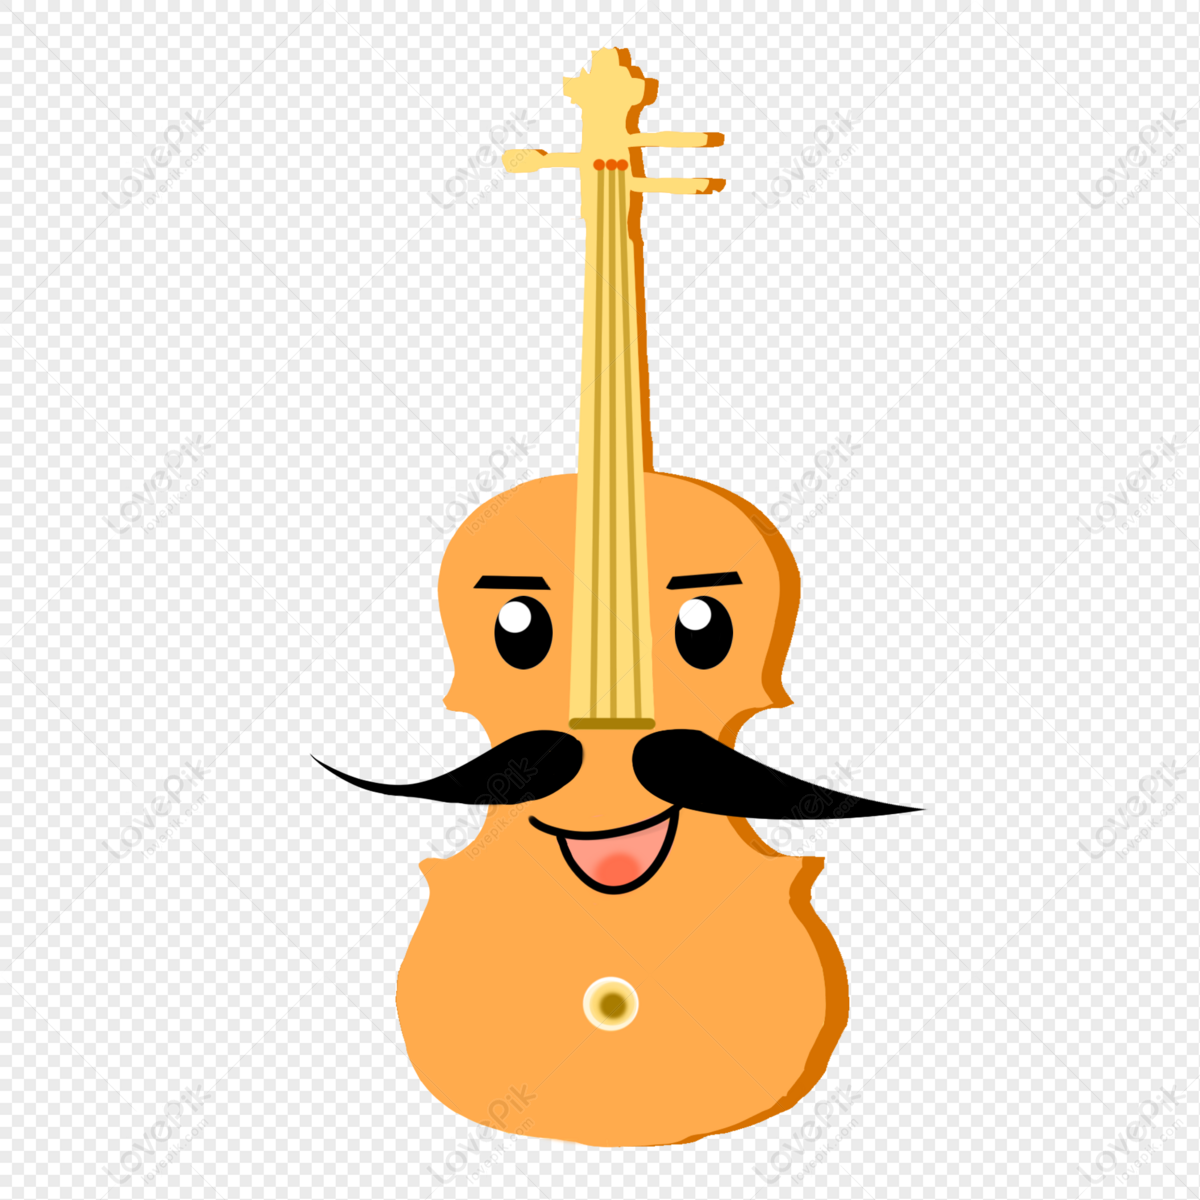 Music Festival Violin PNG Image Free Download And Clipart Image For Free  Download - Lovepik | 401238791